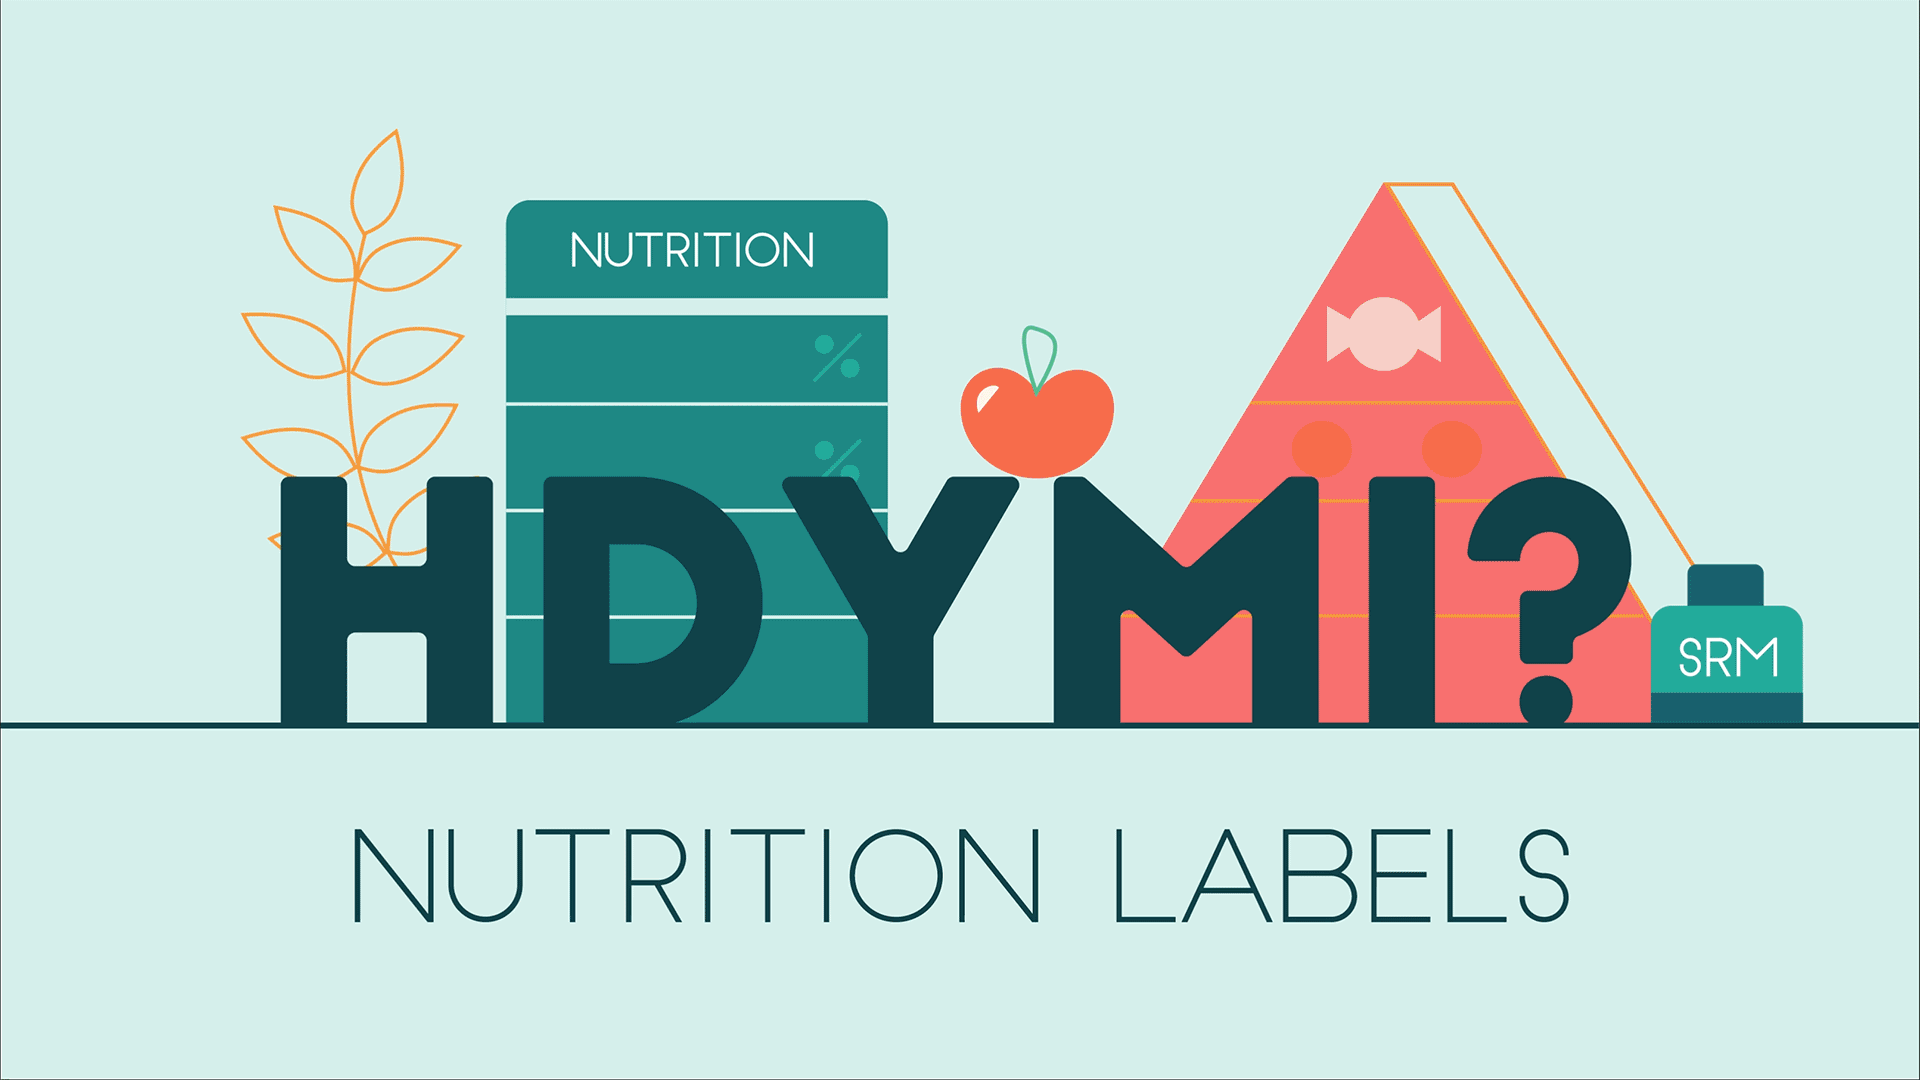 Animated image says "HDYMI? Nutrition Labels" with images of apple, avocado, other foods.